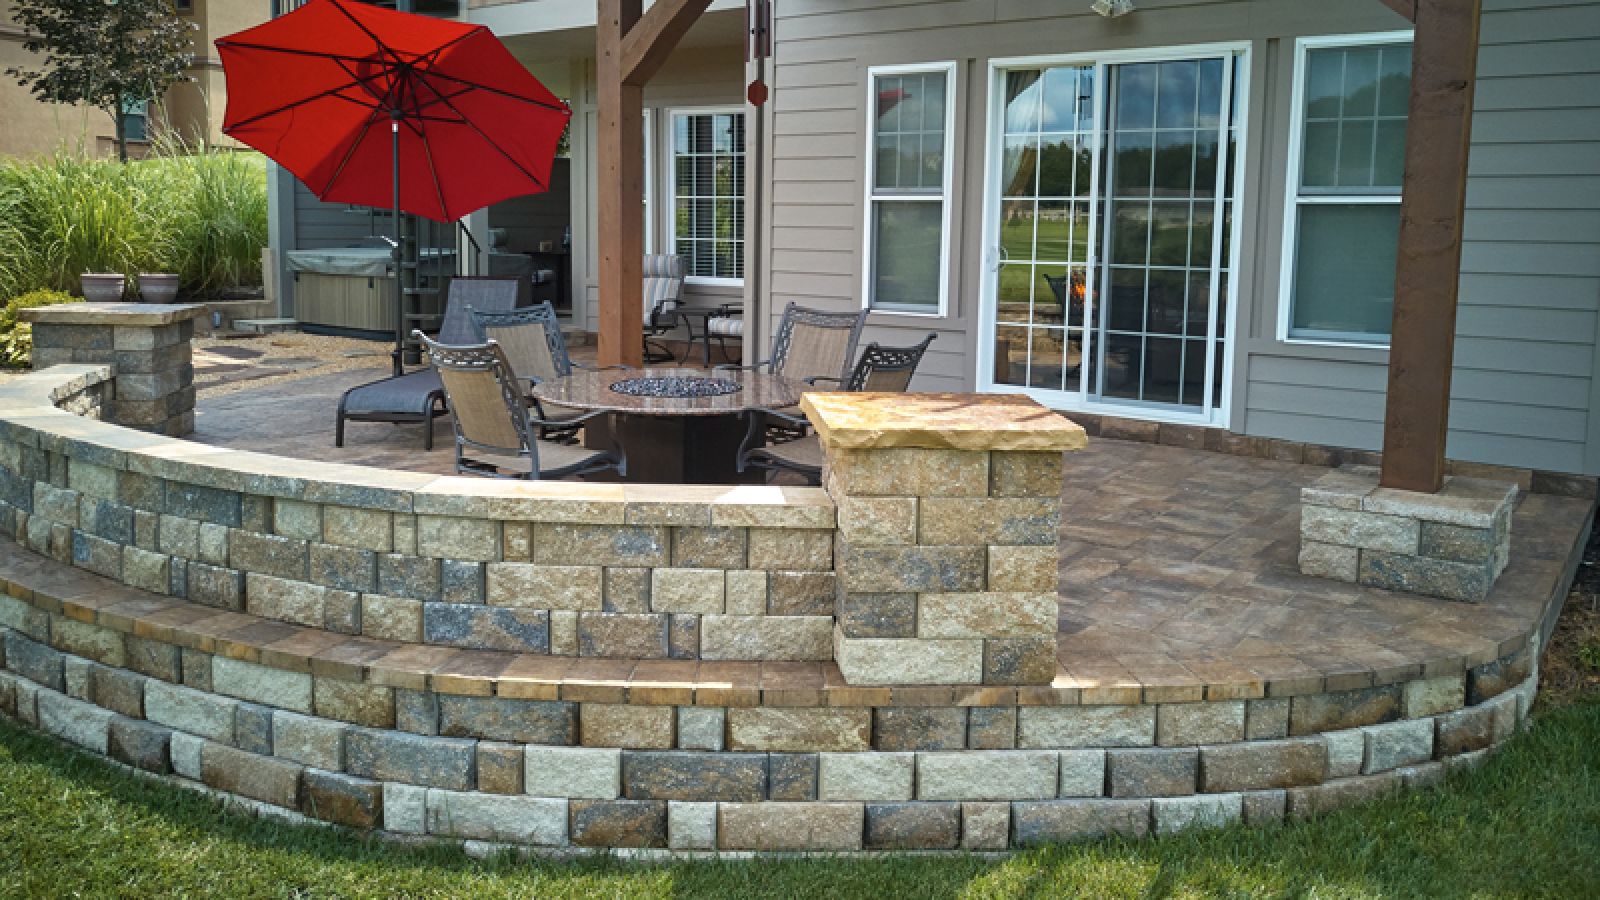 Harington® Freestanding units by Keystone Hardscapes, featured at AR Stoneworks & Outdoor Living, depicting its straight split face design.